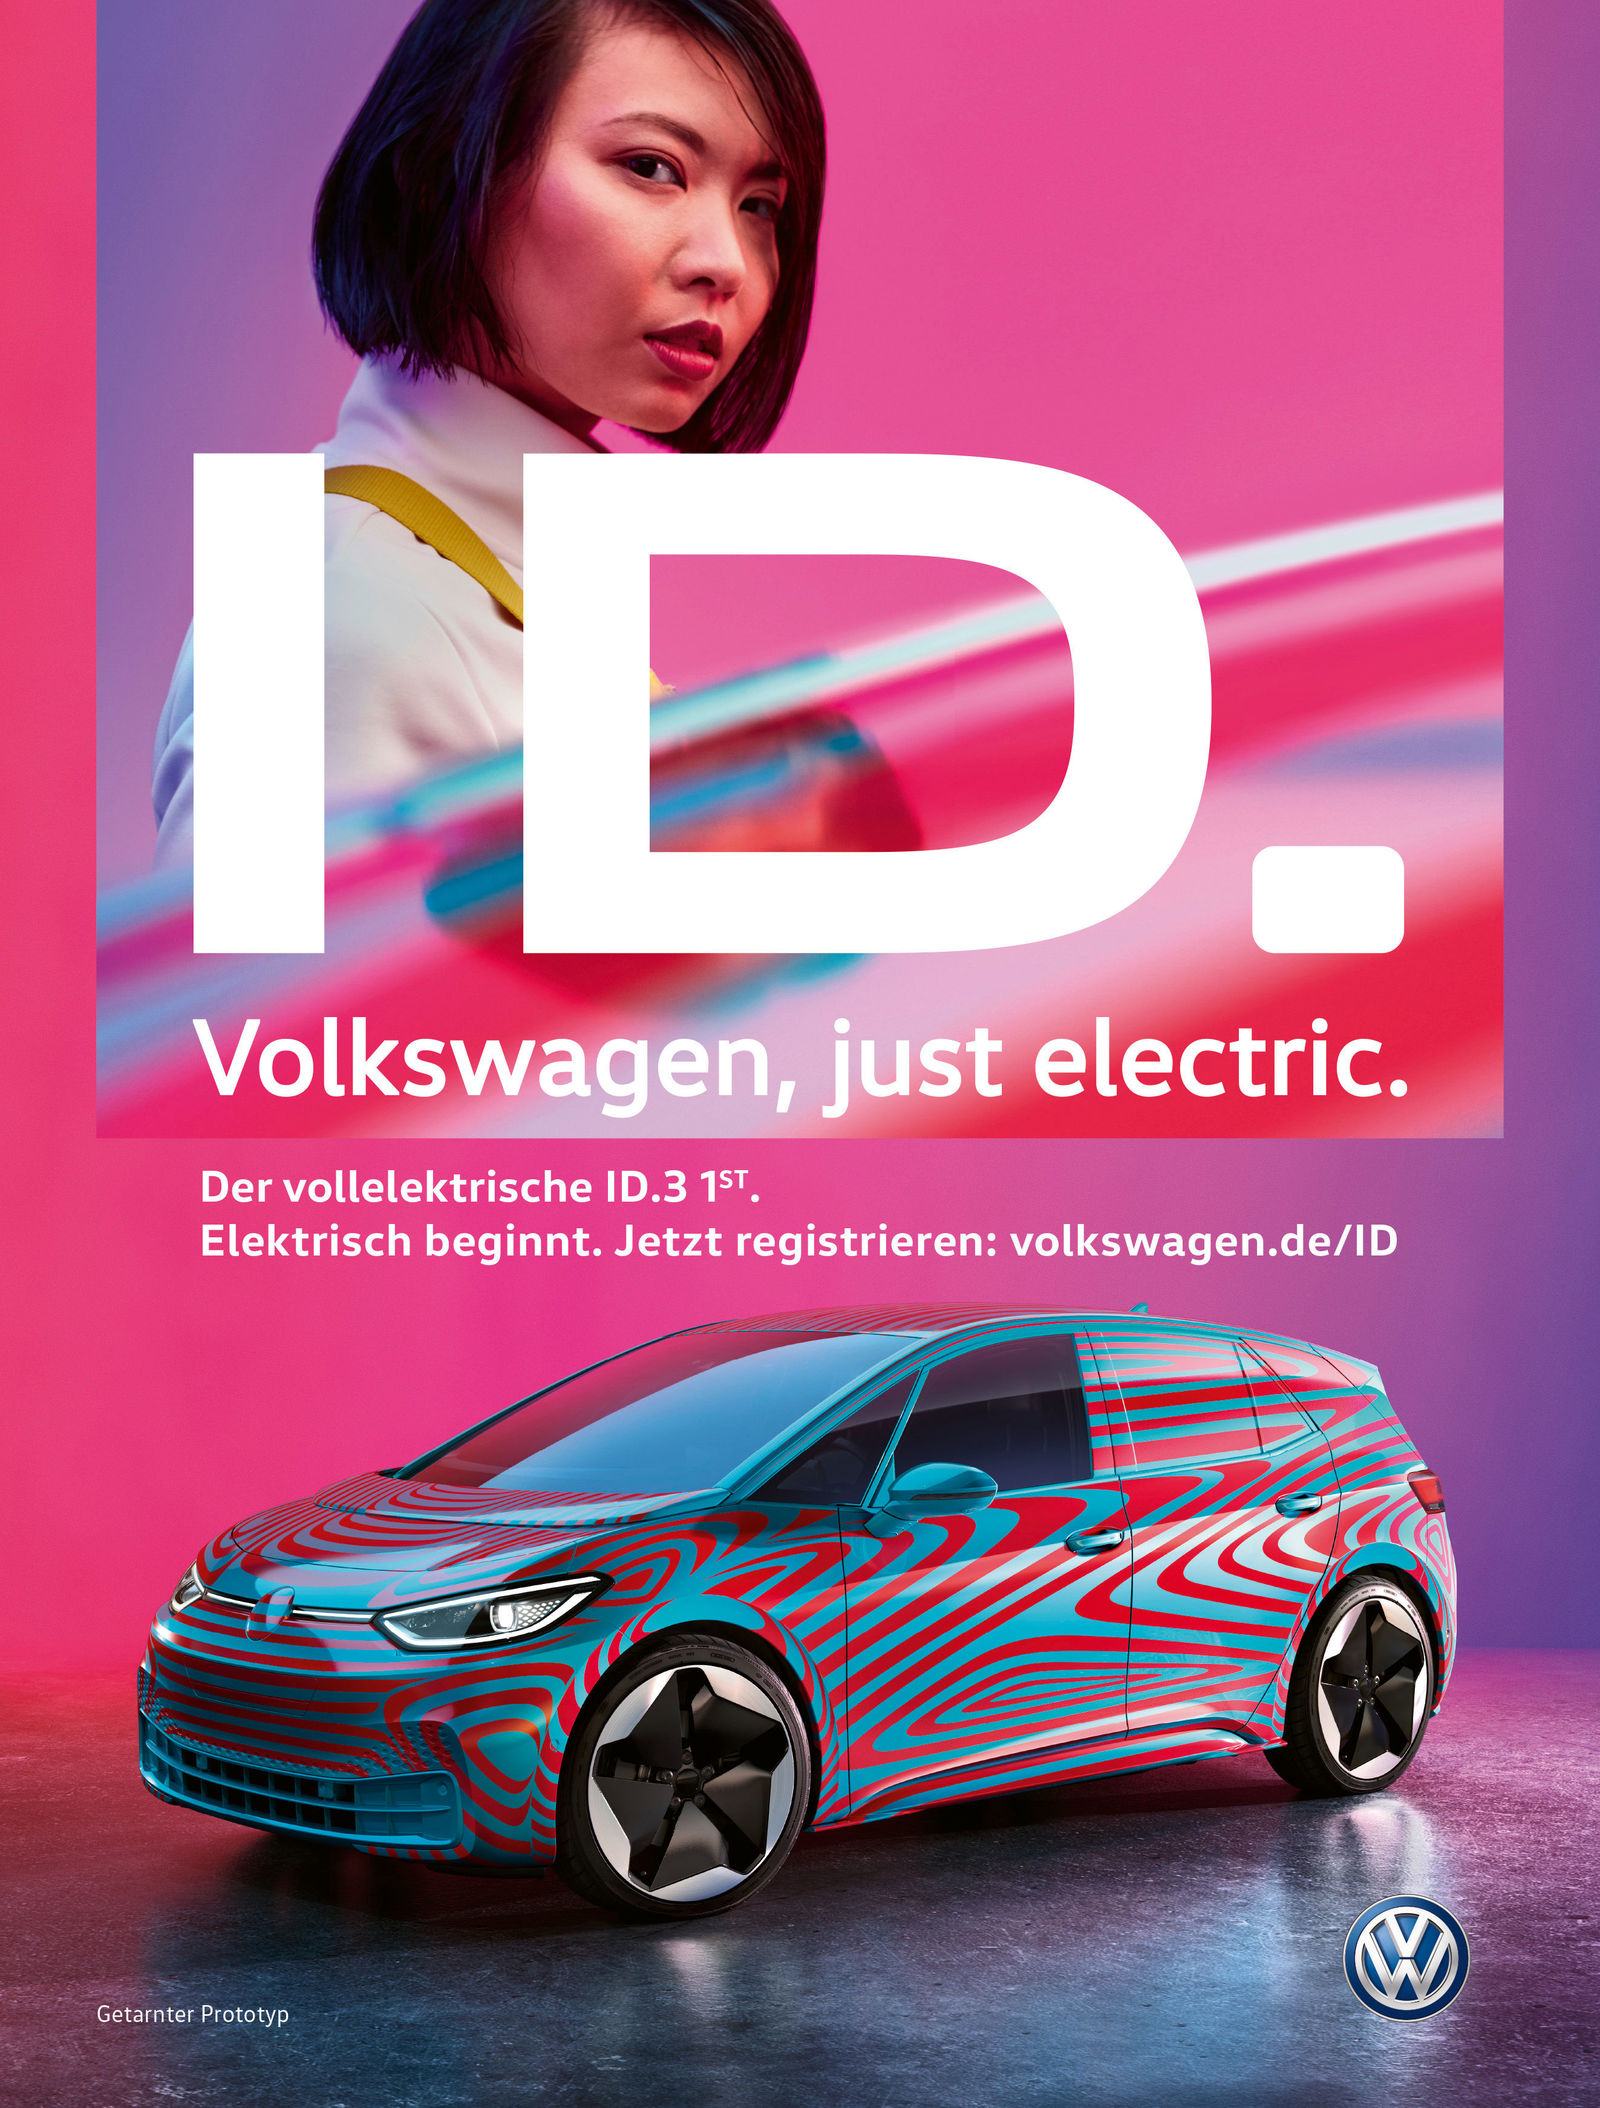 Volkswagen with international e-mobility marketing campaign